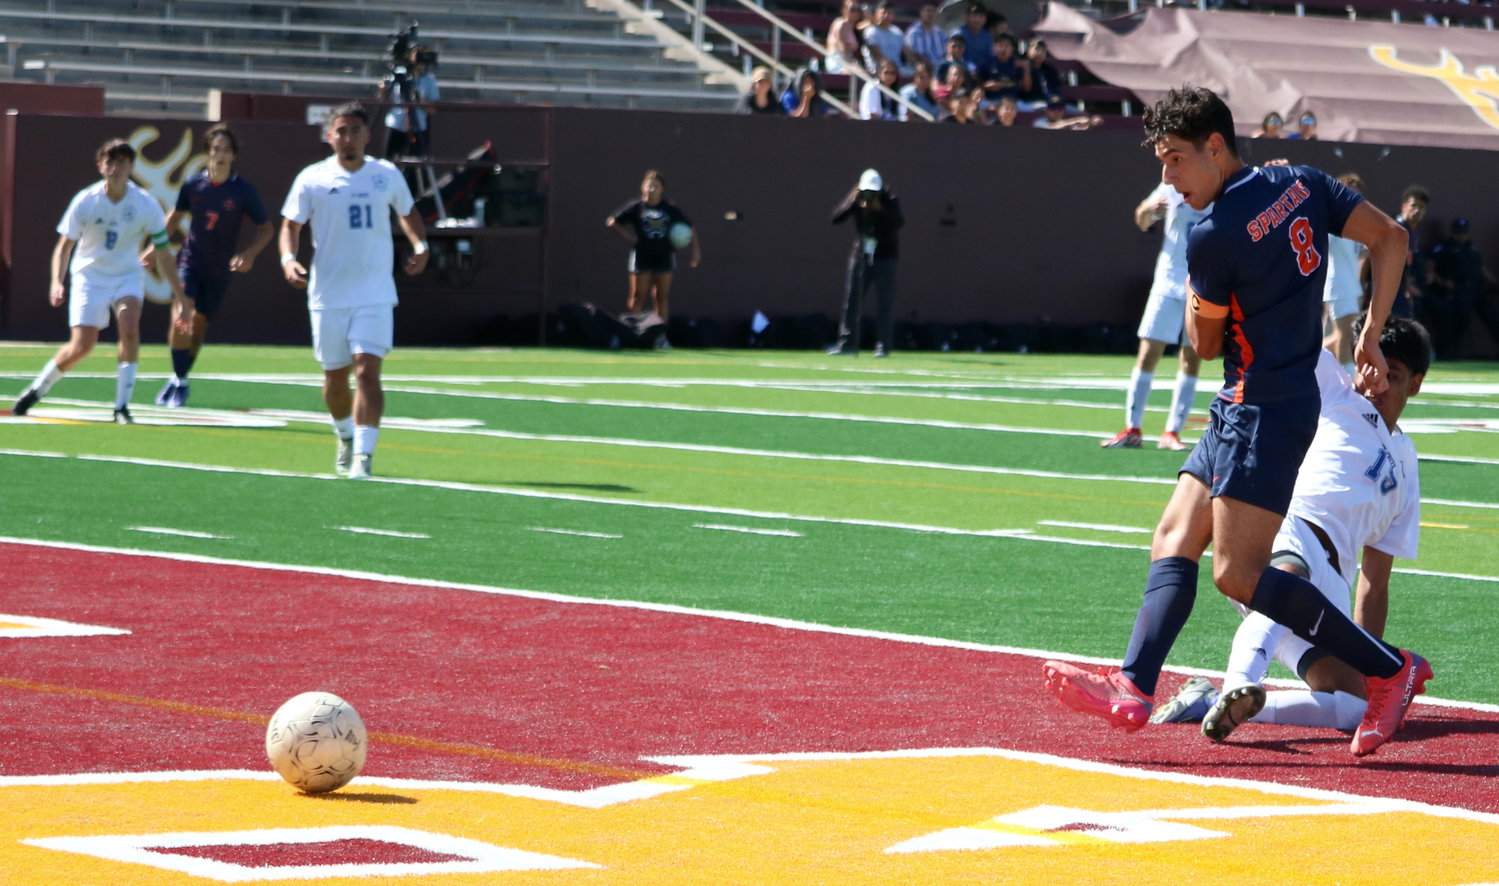 Javier Rivas shoots during Saturday’s Class 6A Region III Final between Seven Lakes and Cy-Creek in Deer Park.